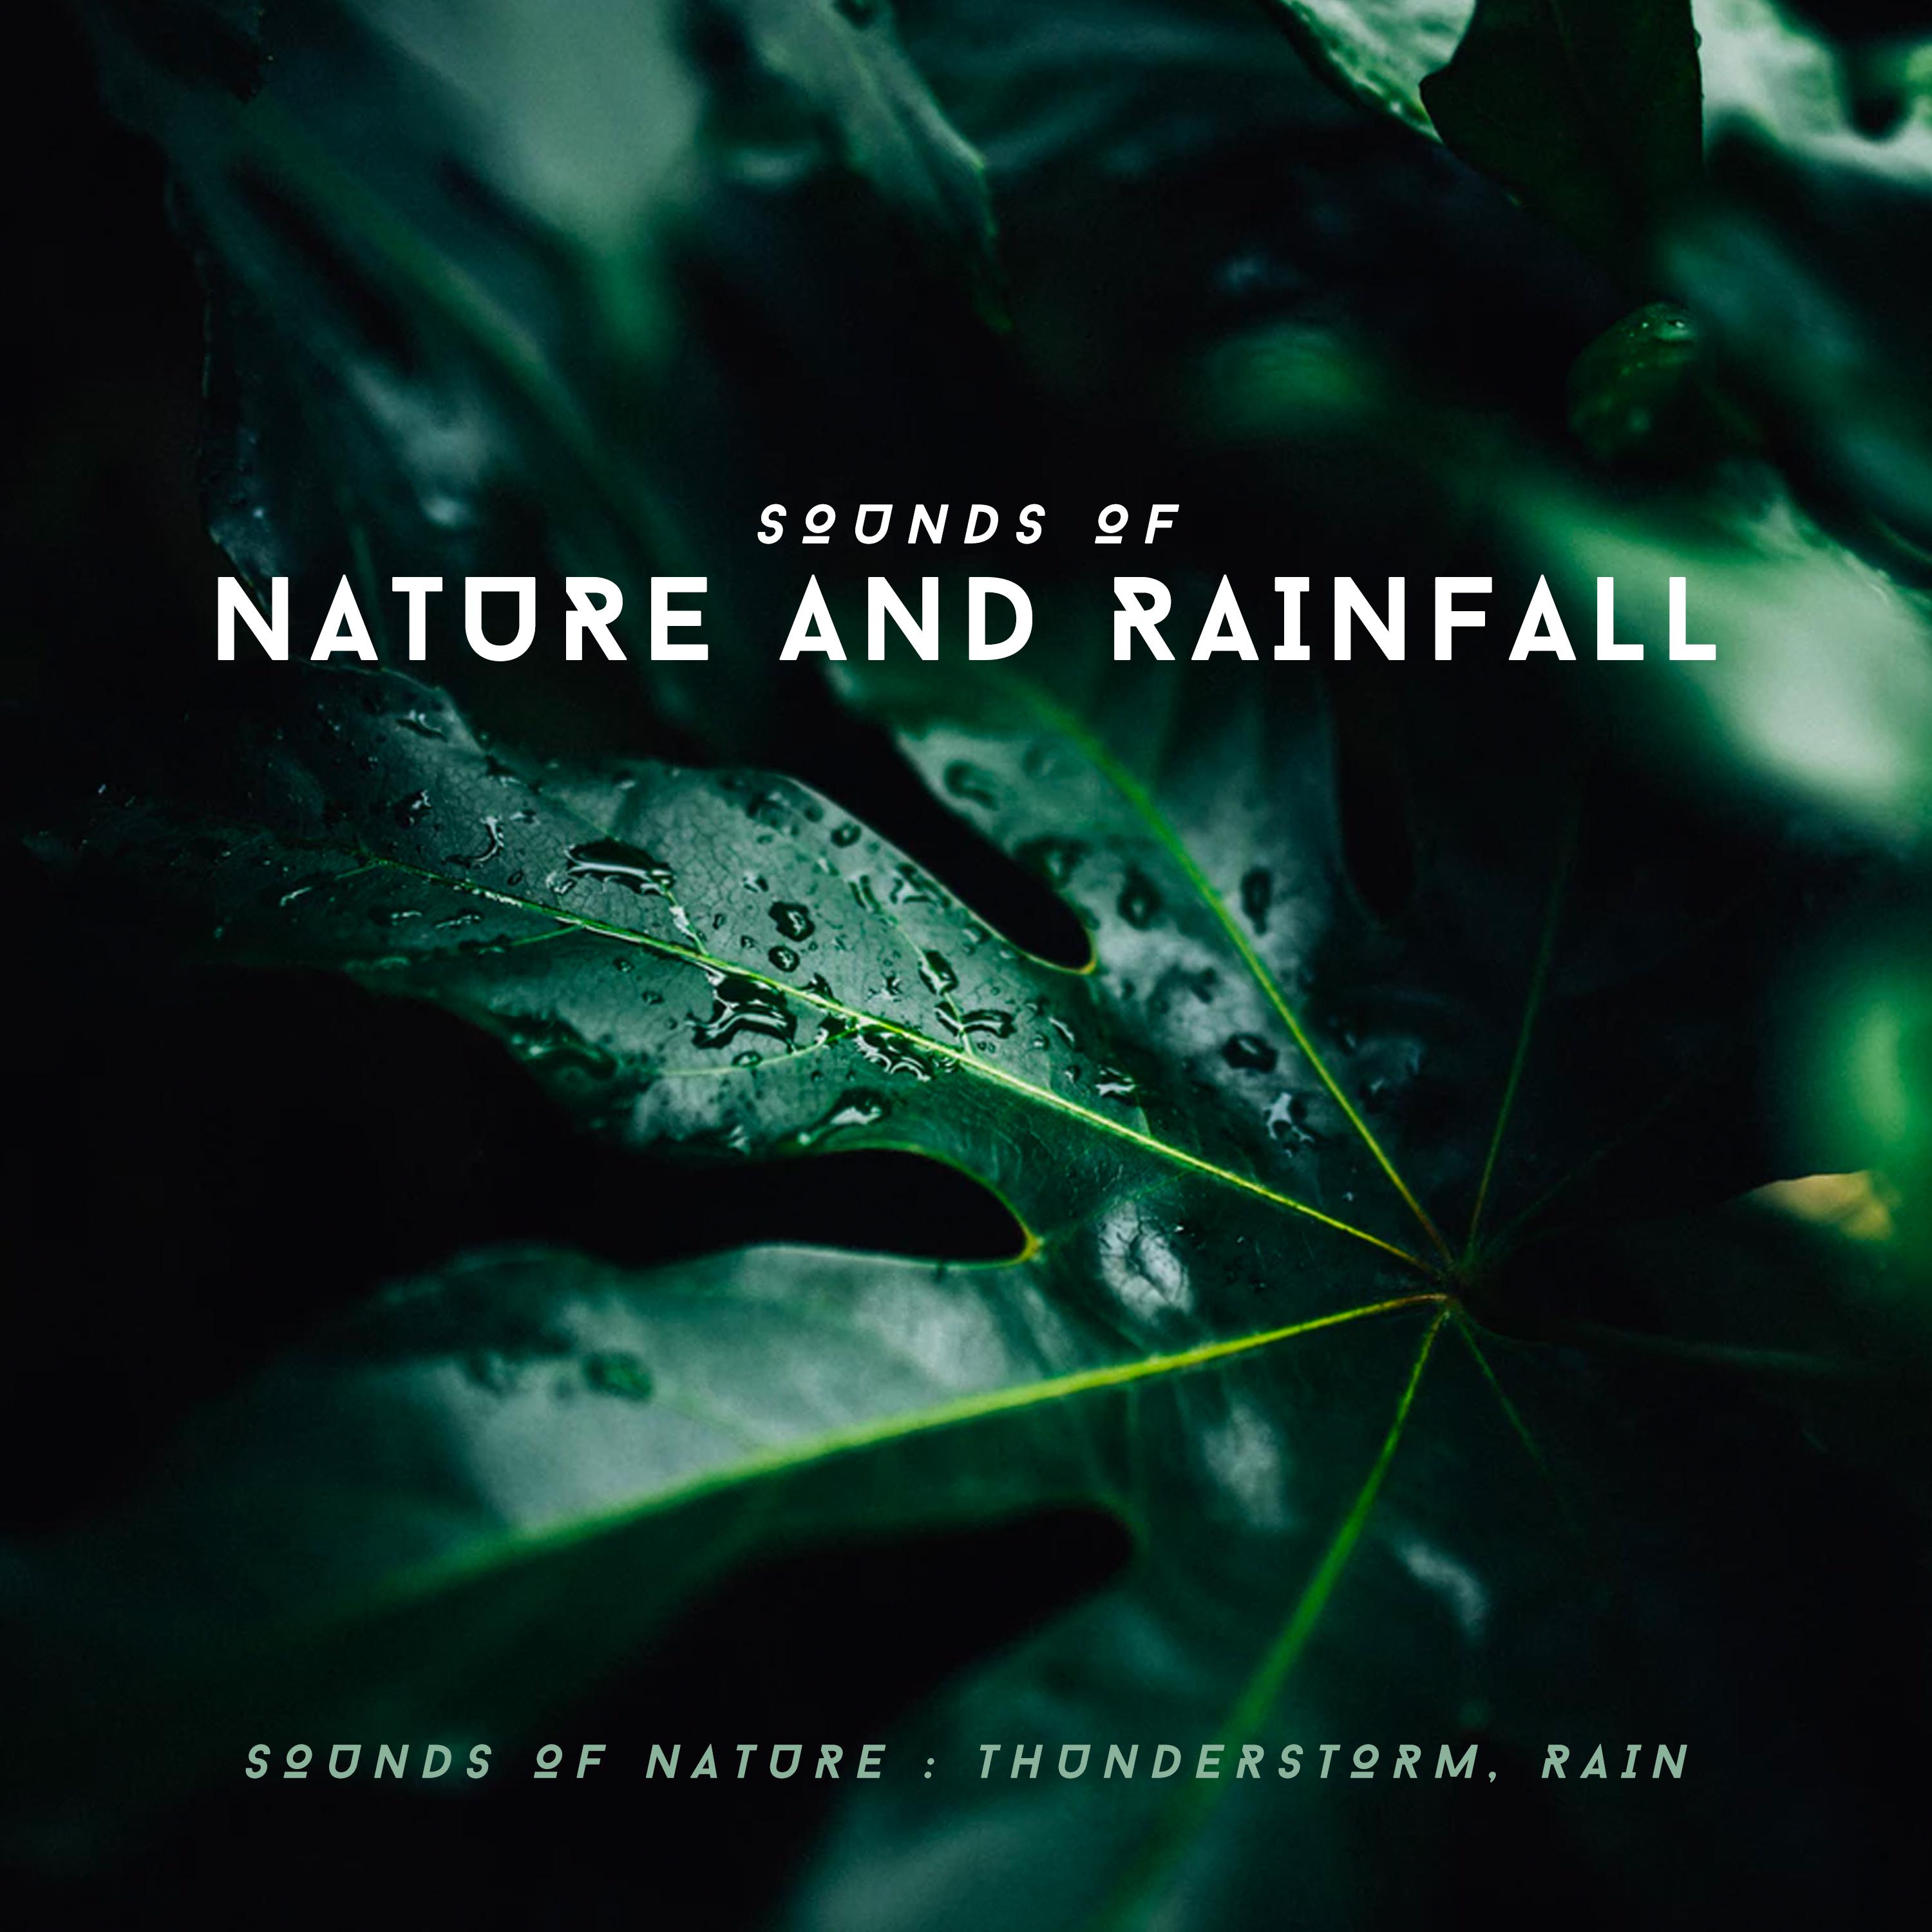 Sounds of Nature and Rainfall